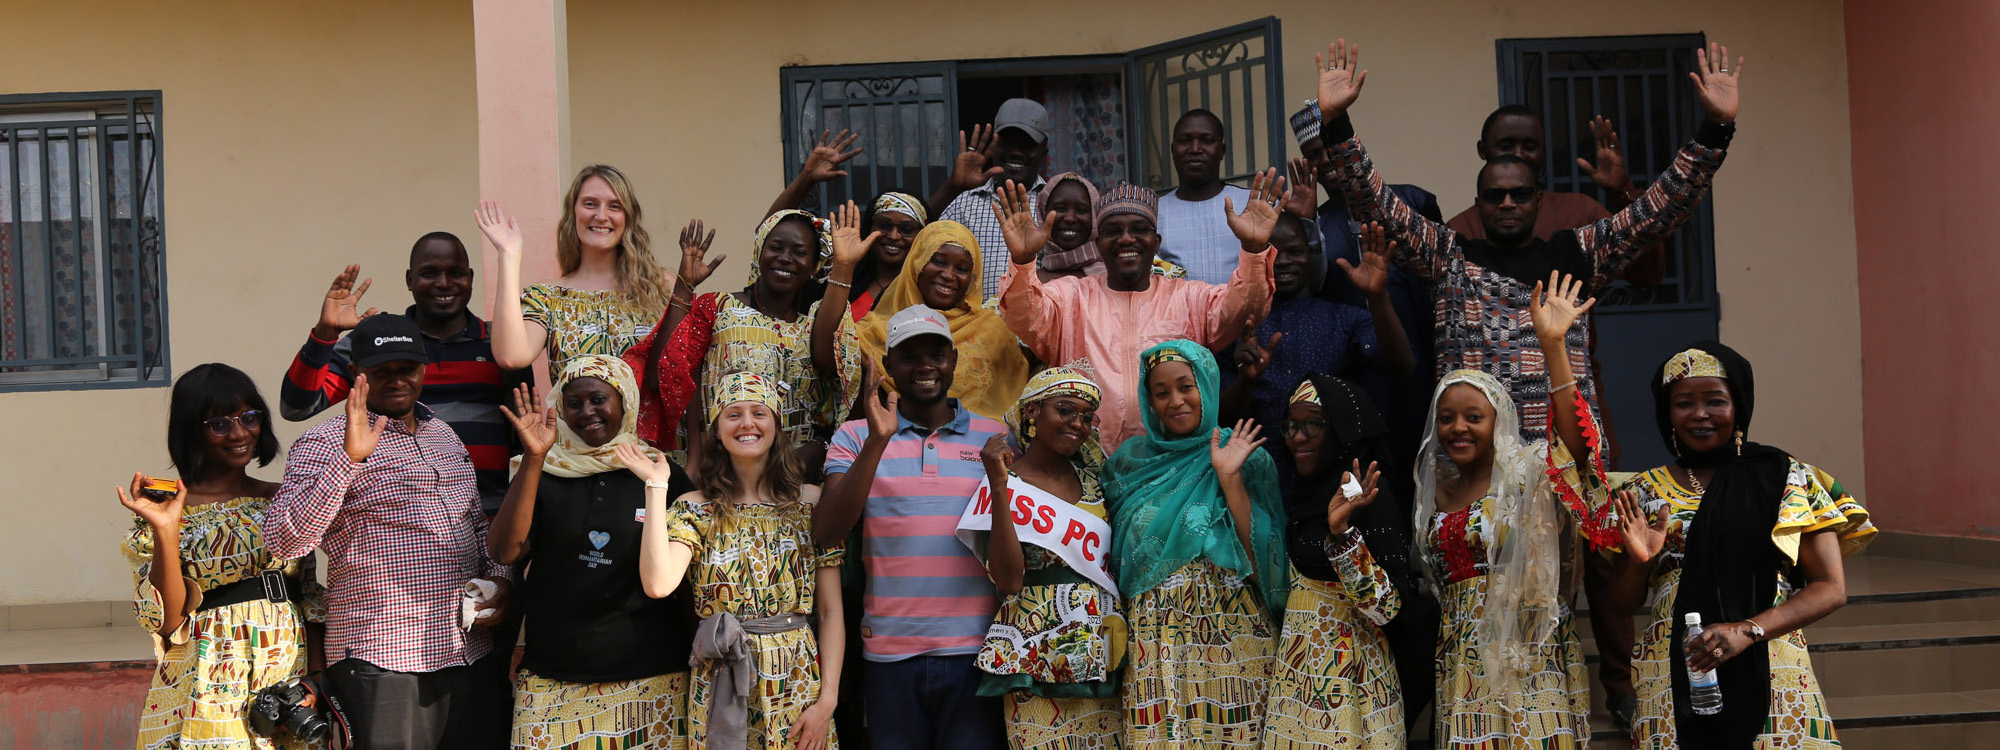 Group of people smiling and waving at camera in Cameroon